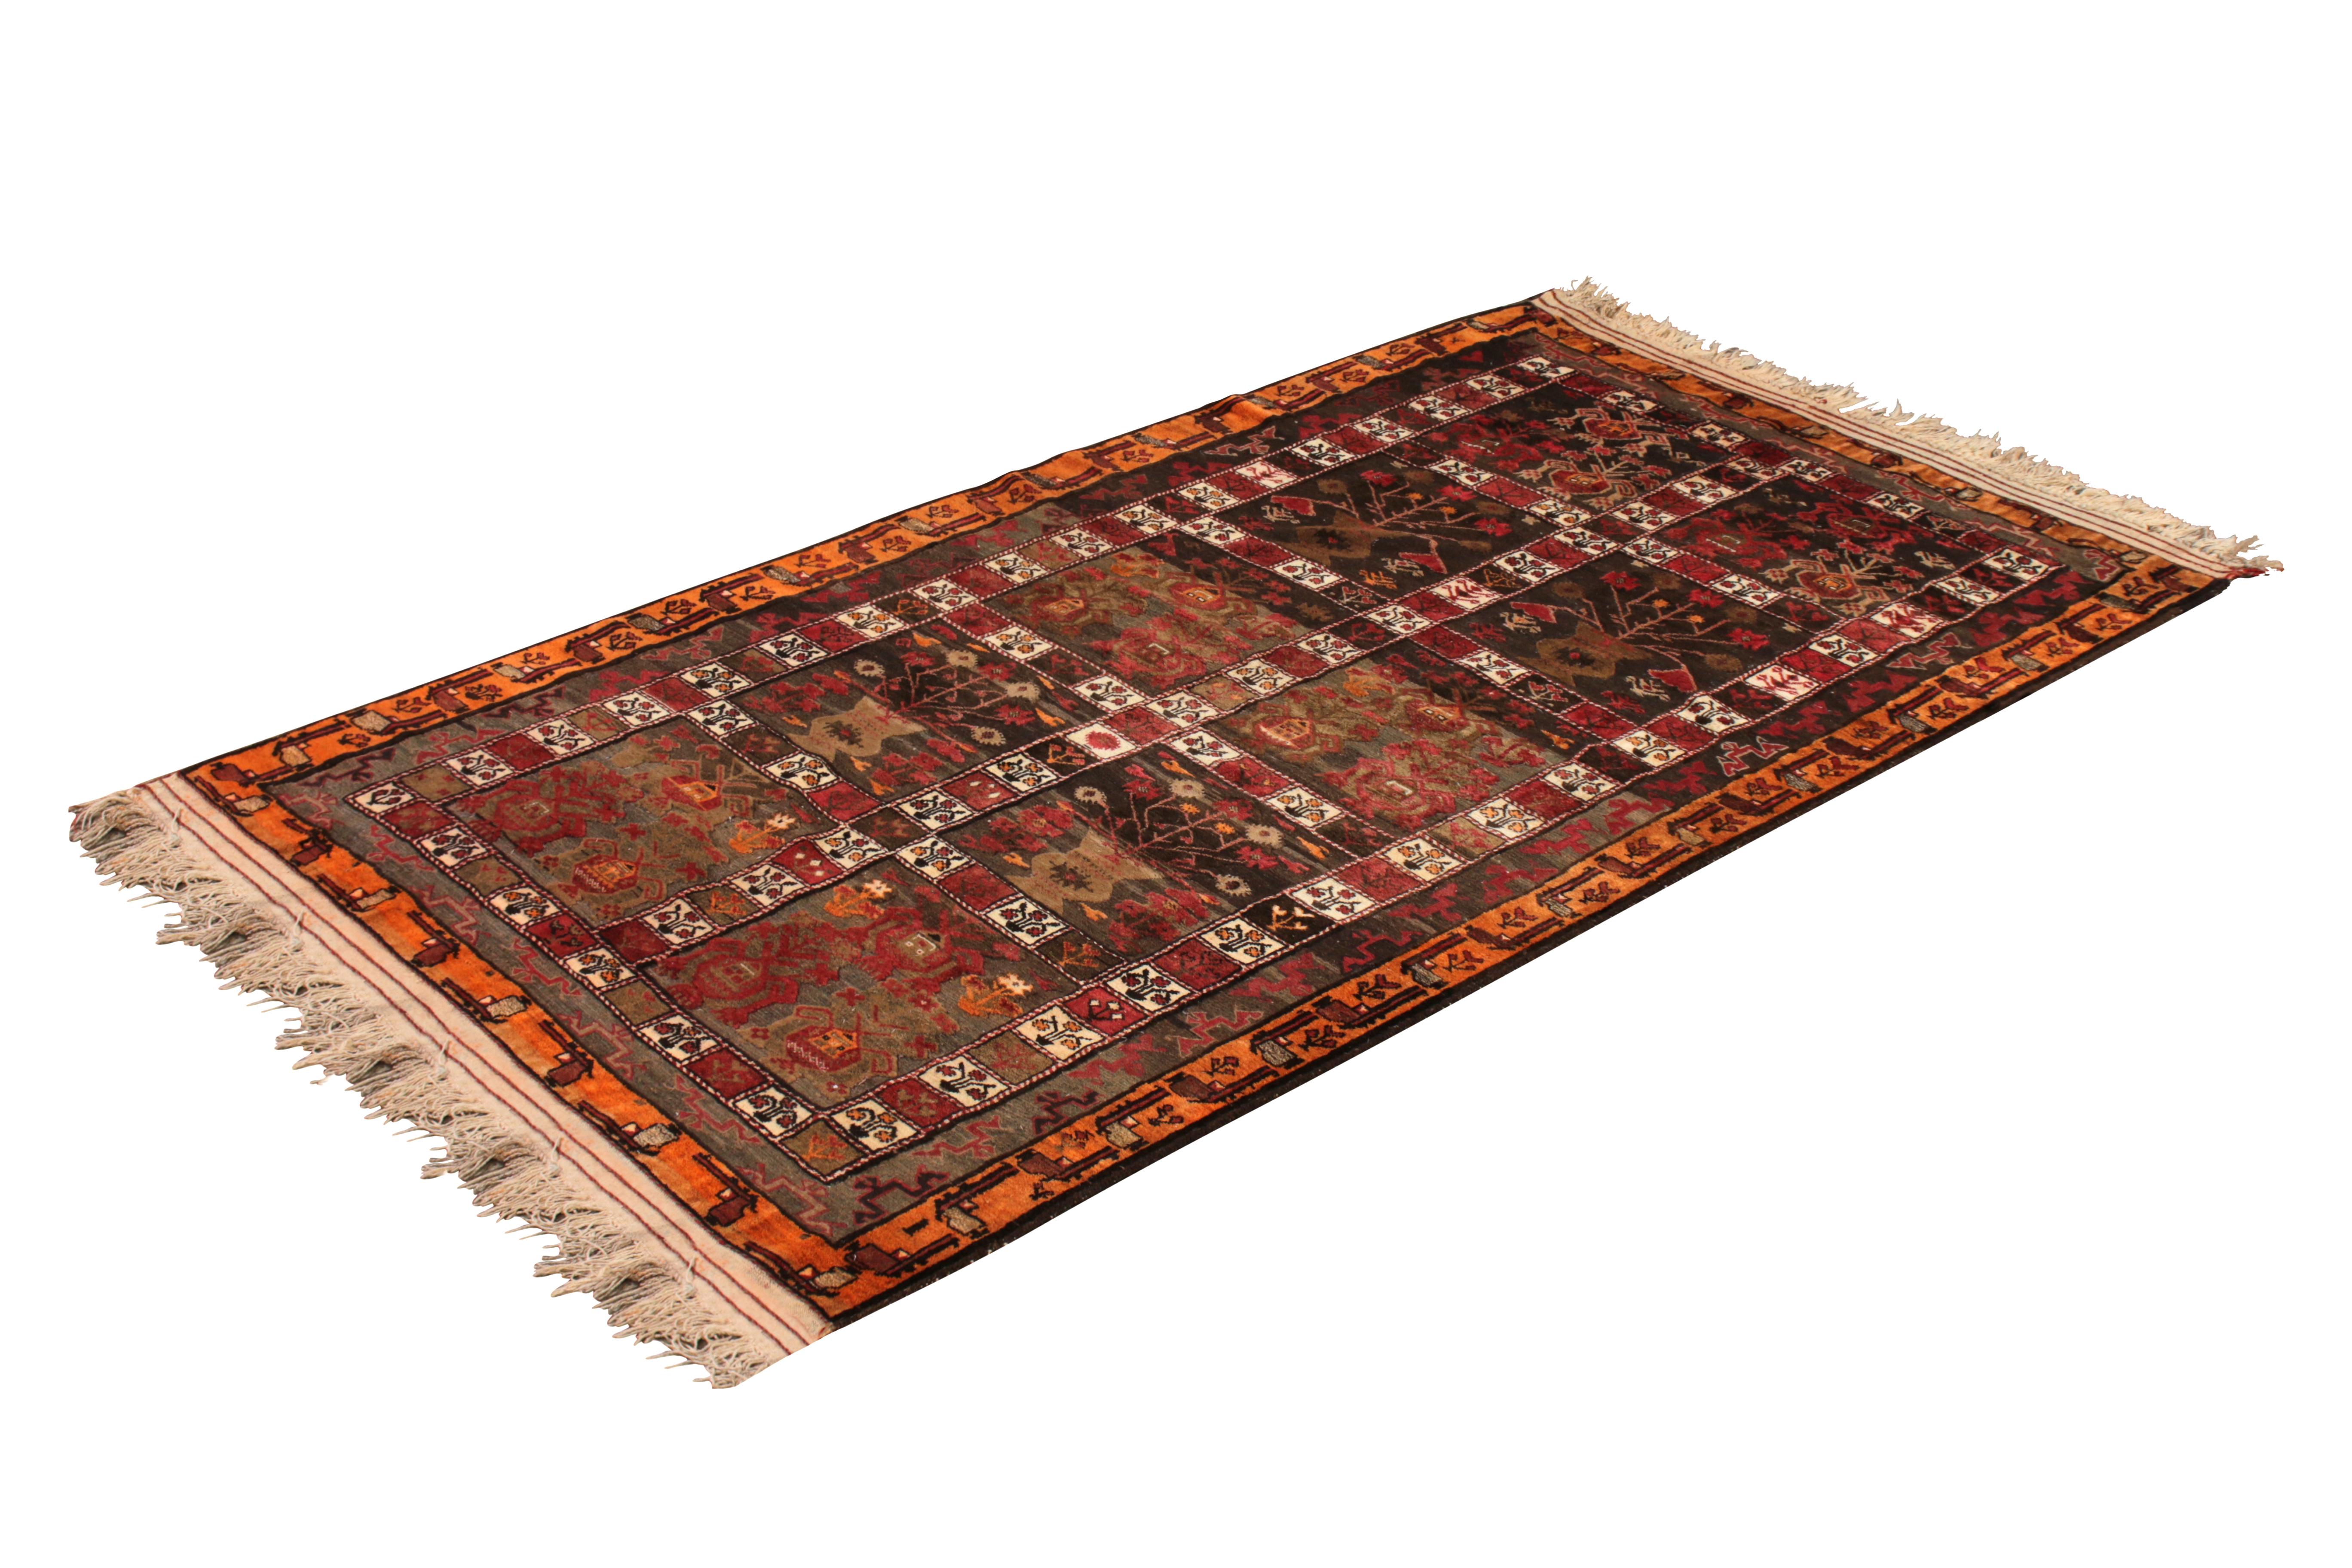 Handwoven in wool originating from Afghanistan, circa 1950-1960, this vintage Kilim connotes a midcentury adaptation of a vase floral pattern in a distinctly rich burgundy and crimson red colorway, playing naturally into earth tones of brown